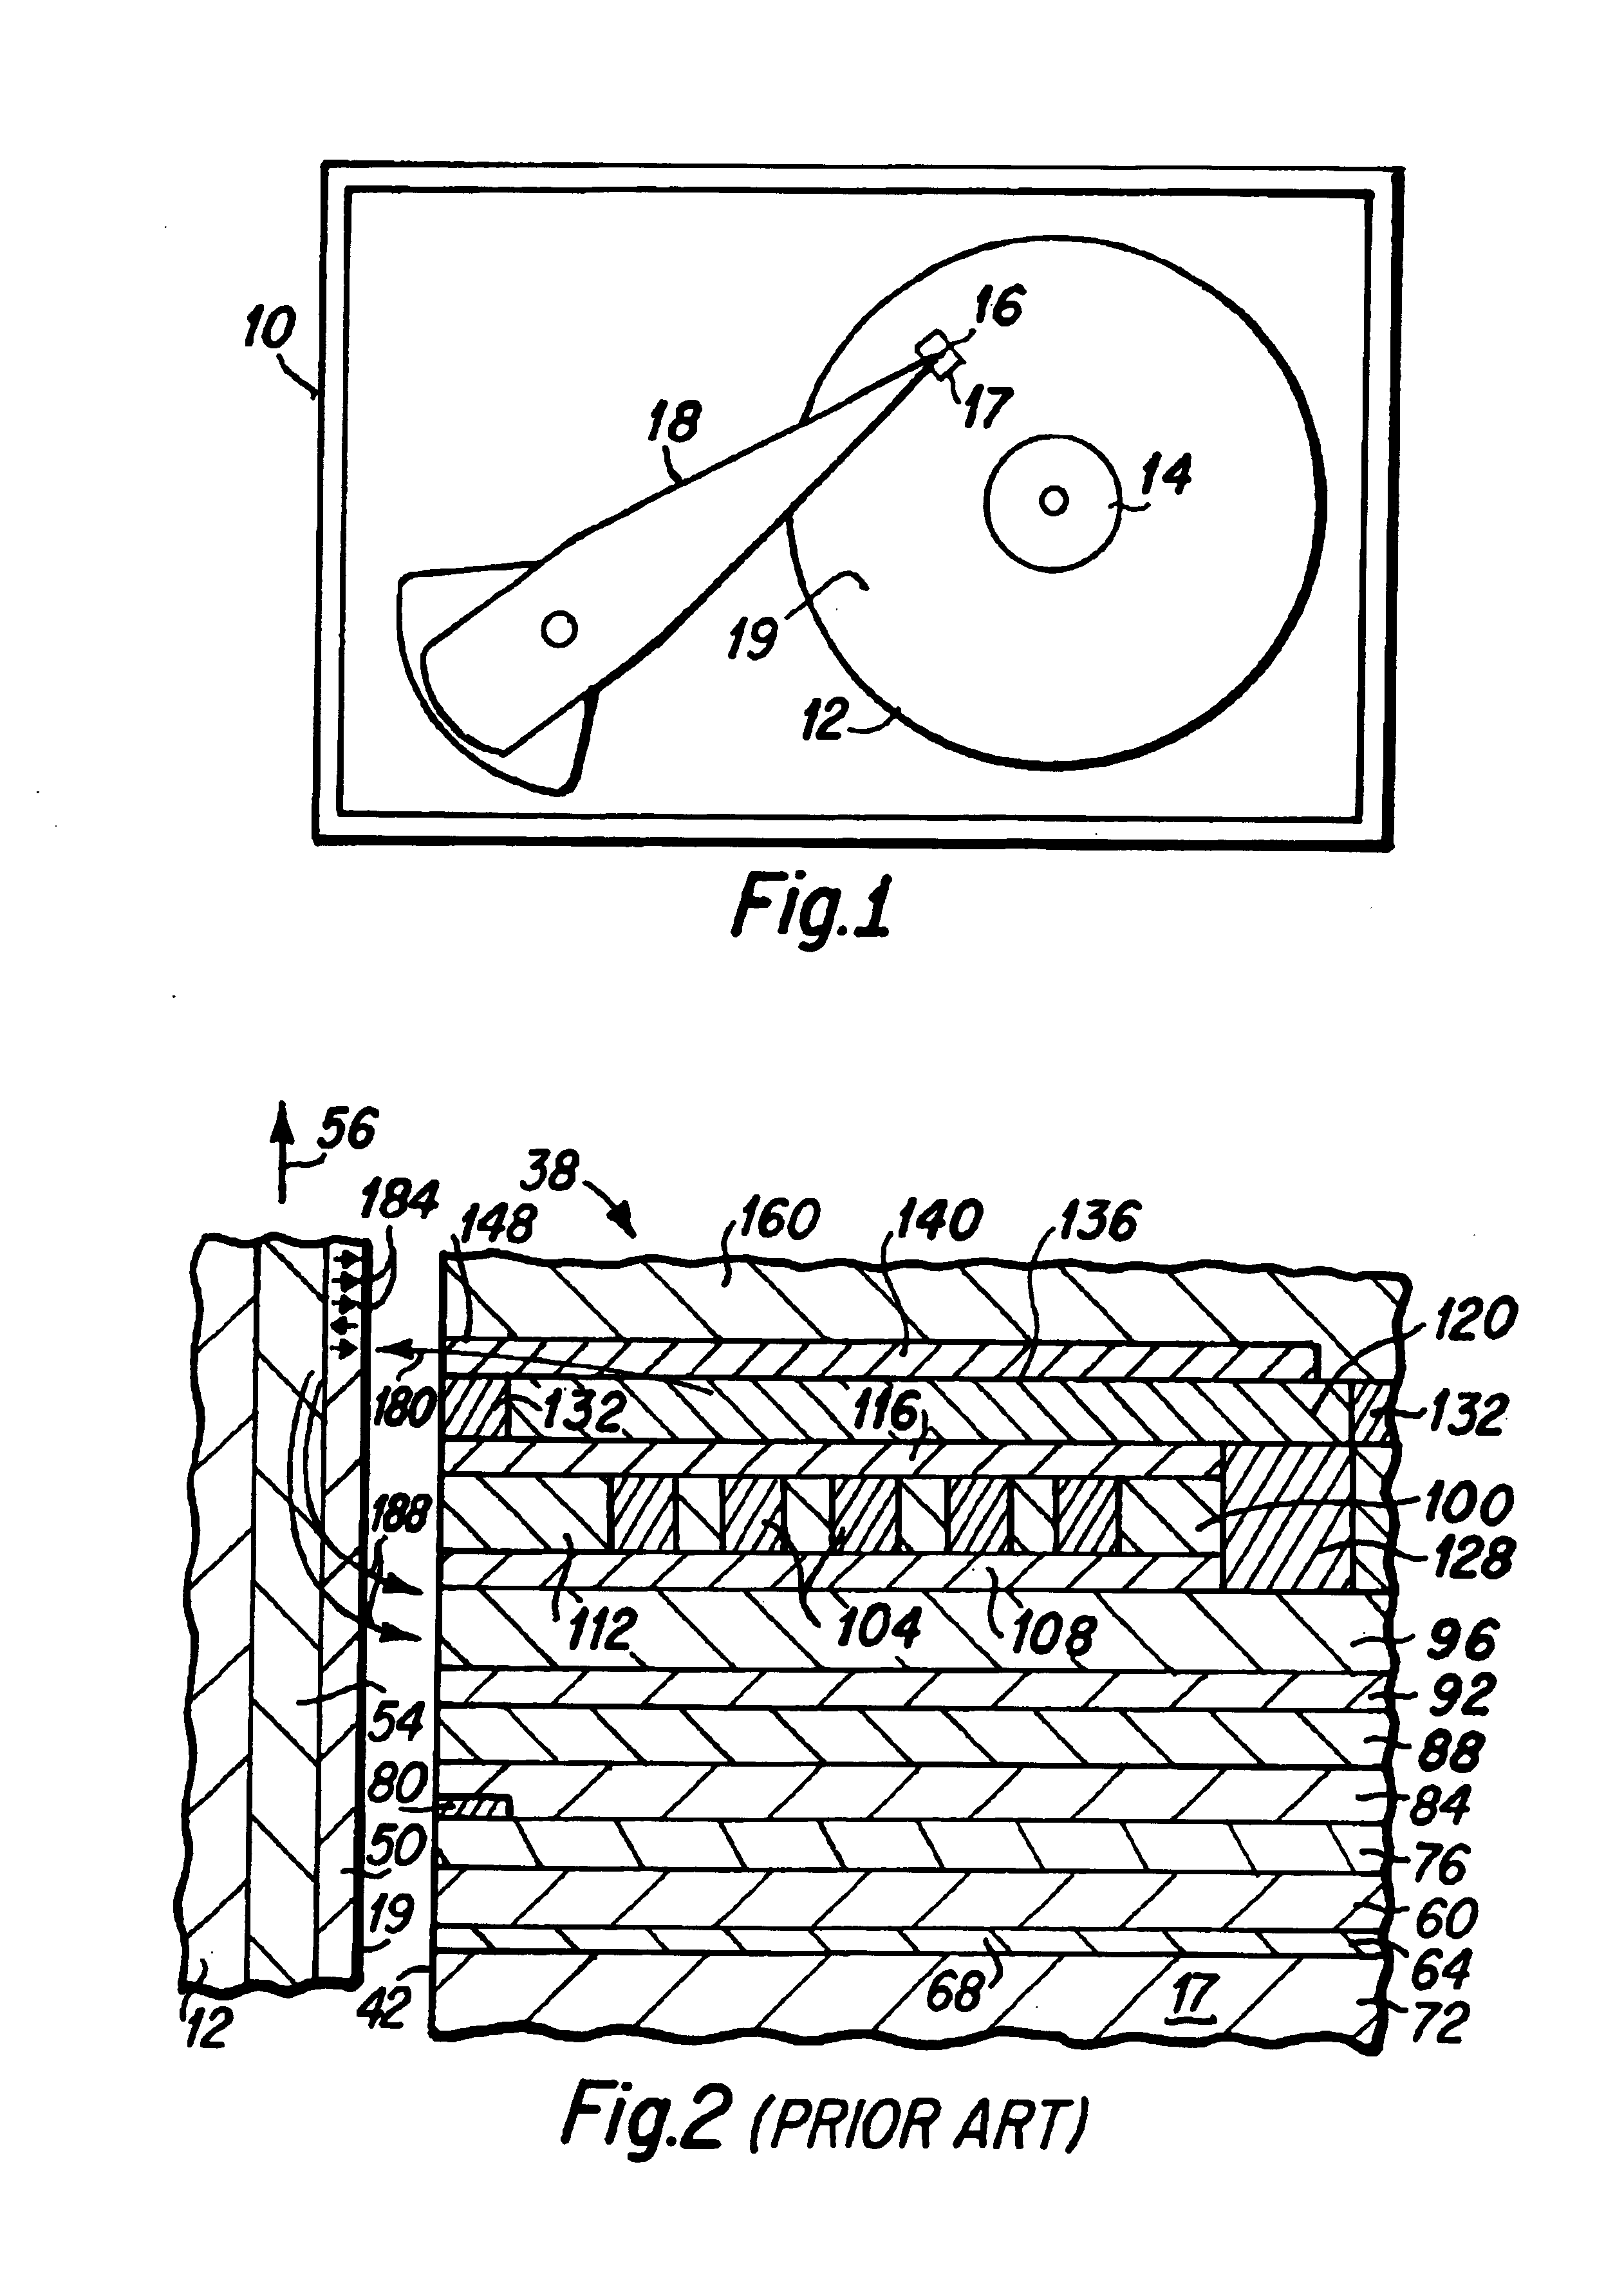 Magnetic head having media heating device that is electrically connected to magnetic pole piece